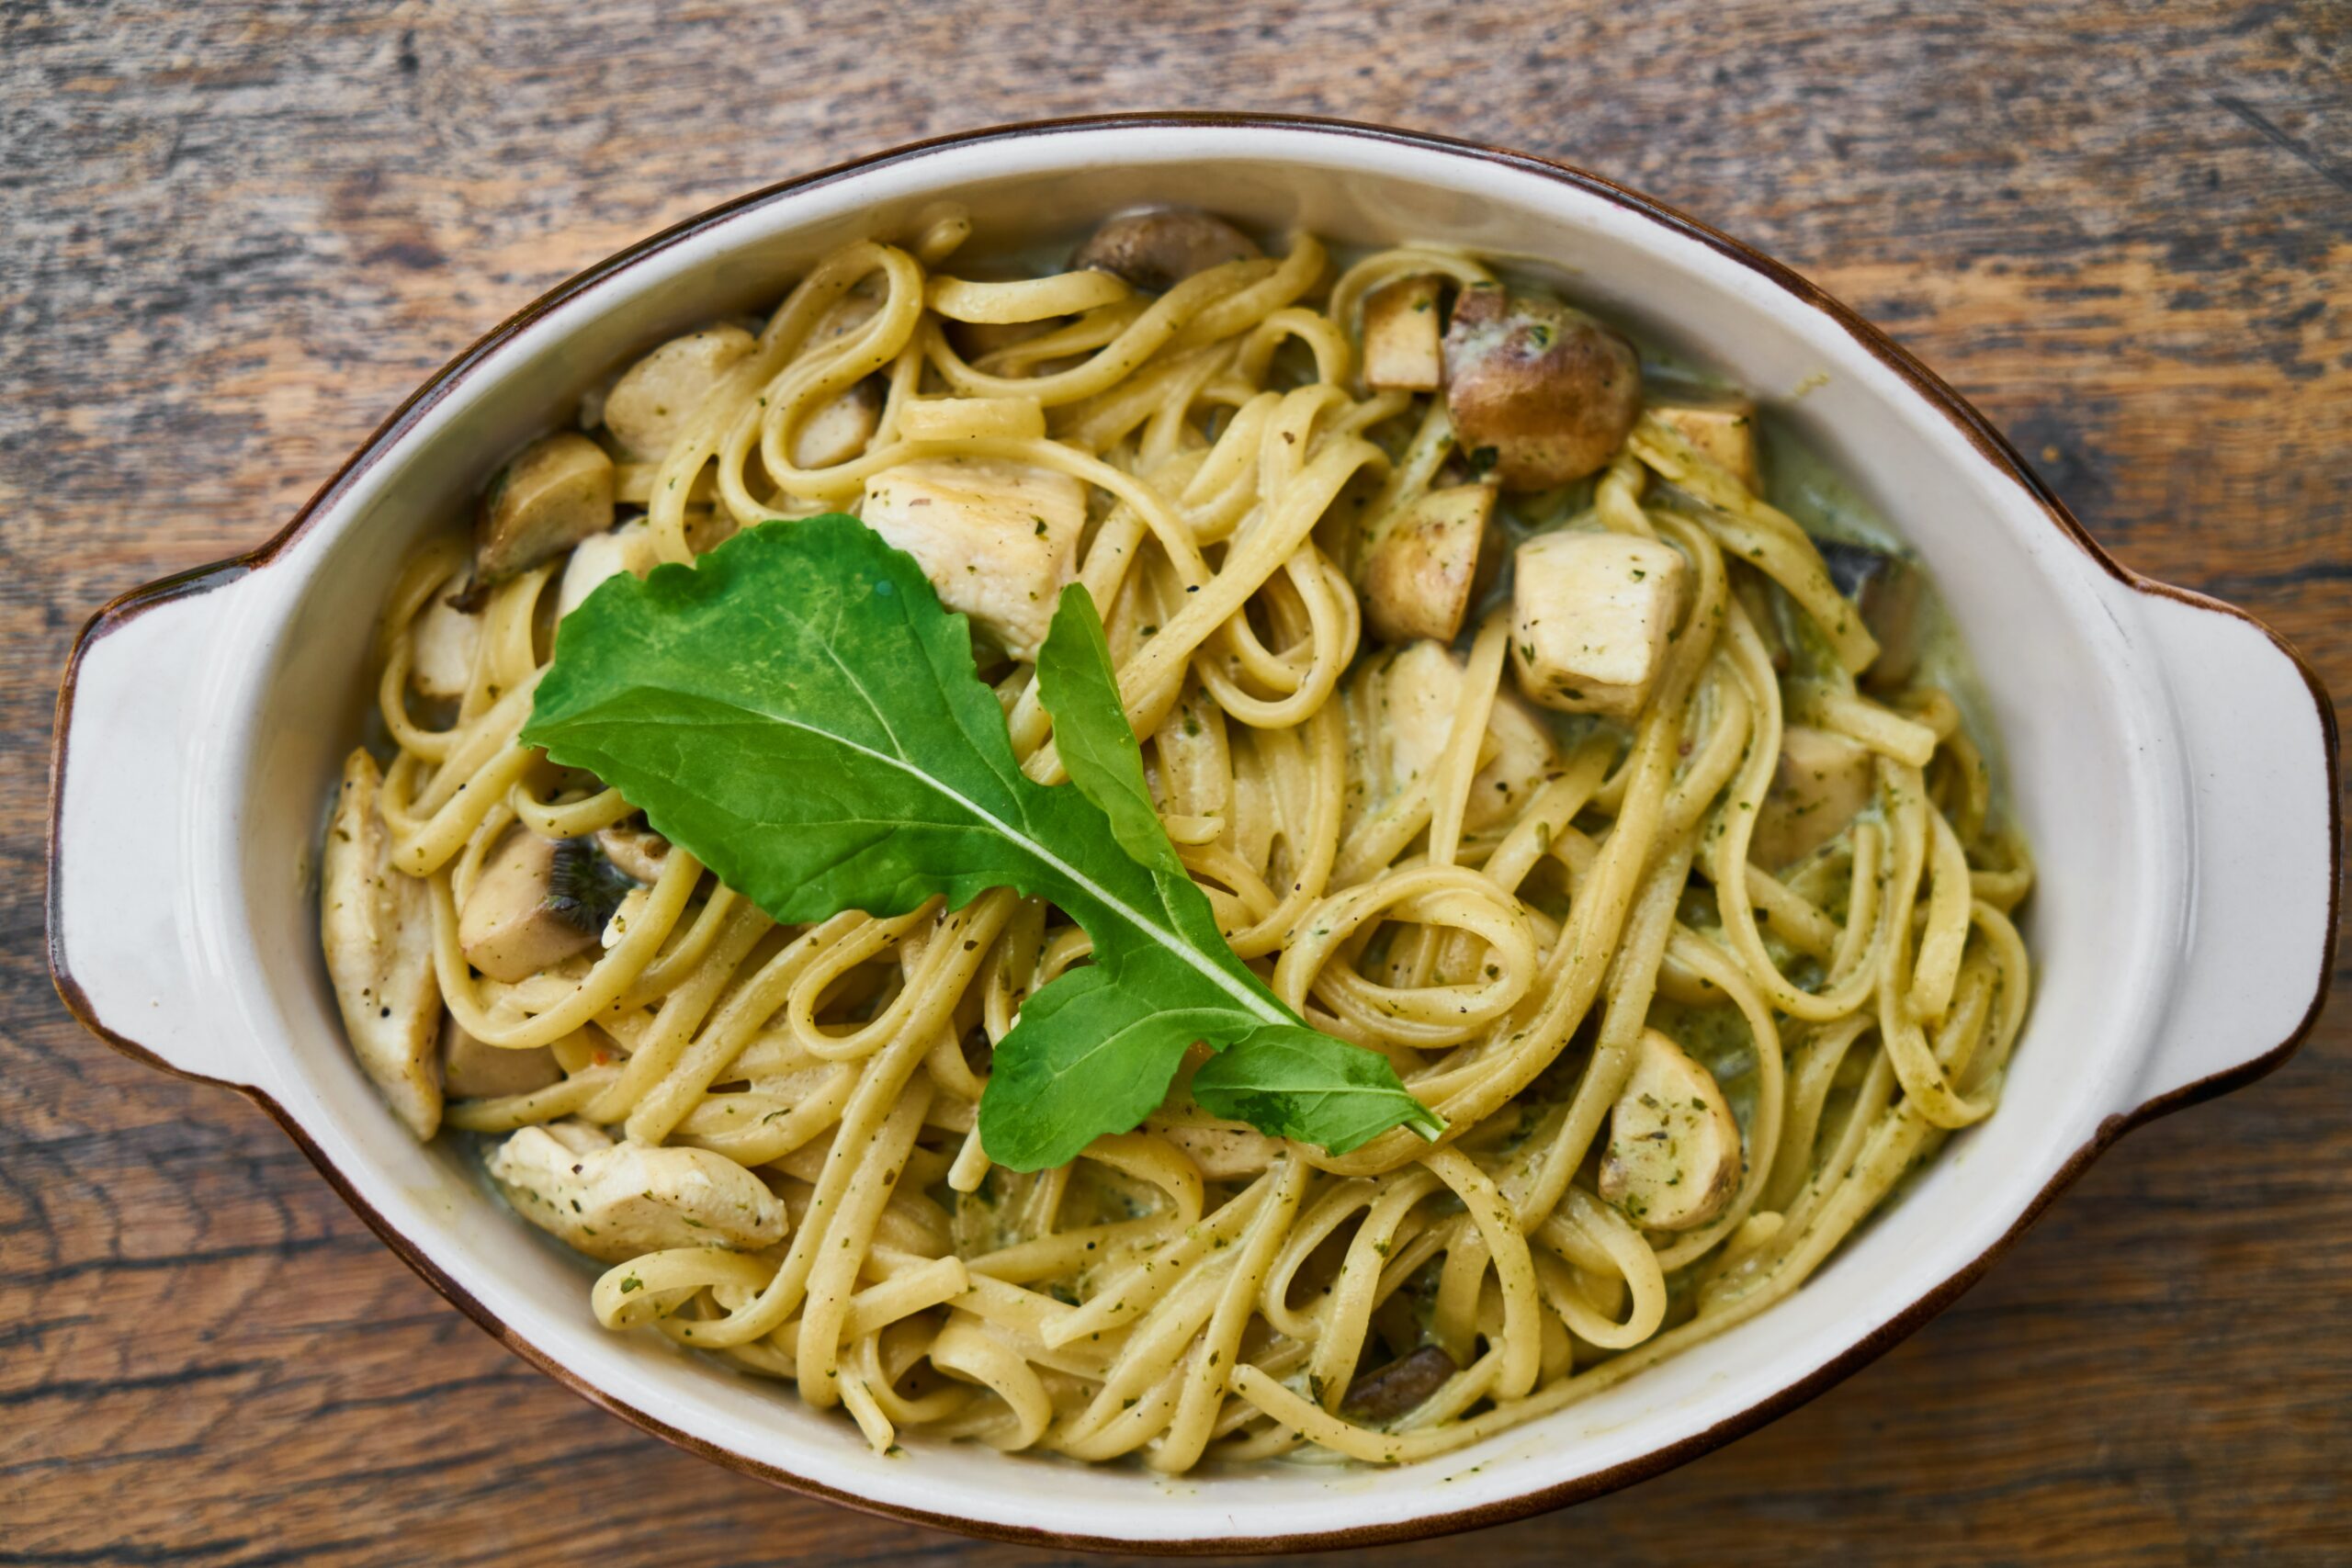 How To Finish A Marathon Race The Endurance Way pasta Carbohydrate meal.